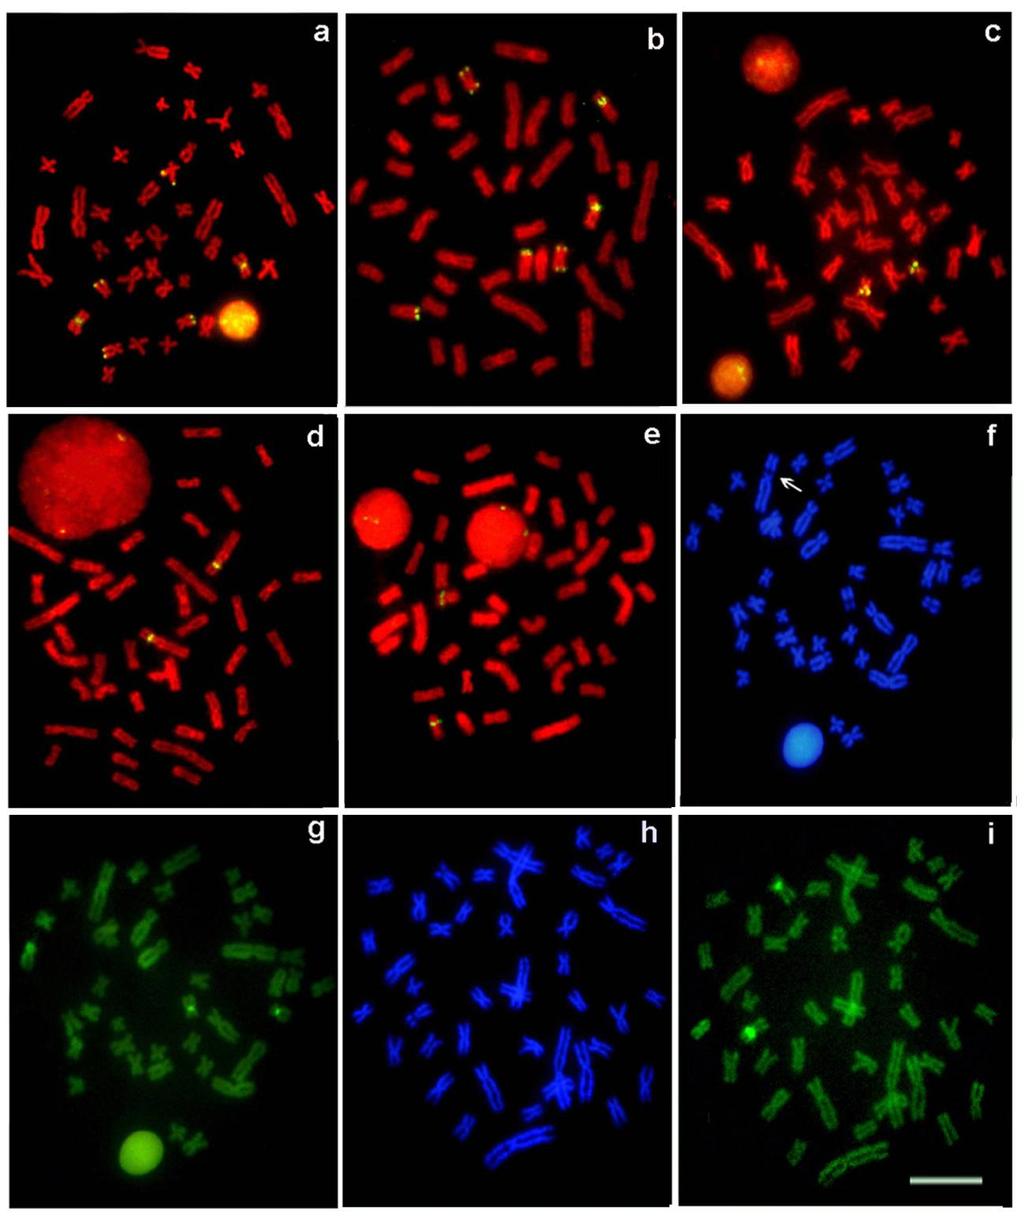 FIG. 3. Metaphase chromosome spreads of Hoplias malabaricus after FISH with 18S and 5S rdna probes and DAPI/Chromomycin A3 staining.